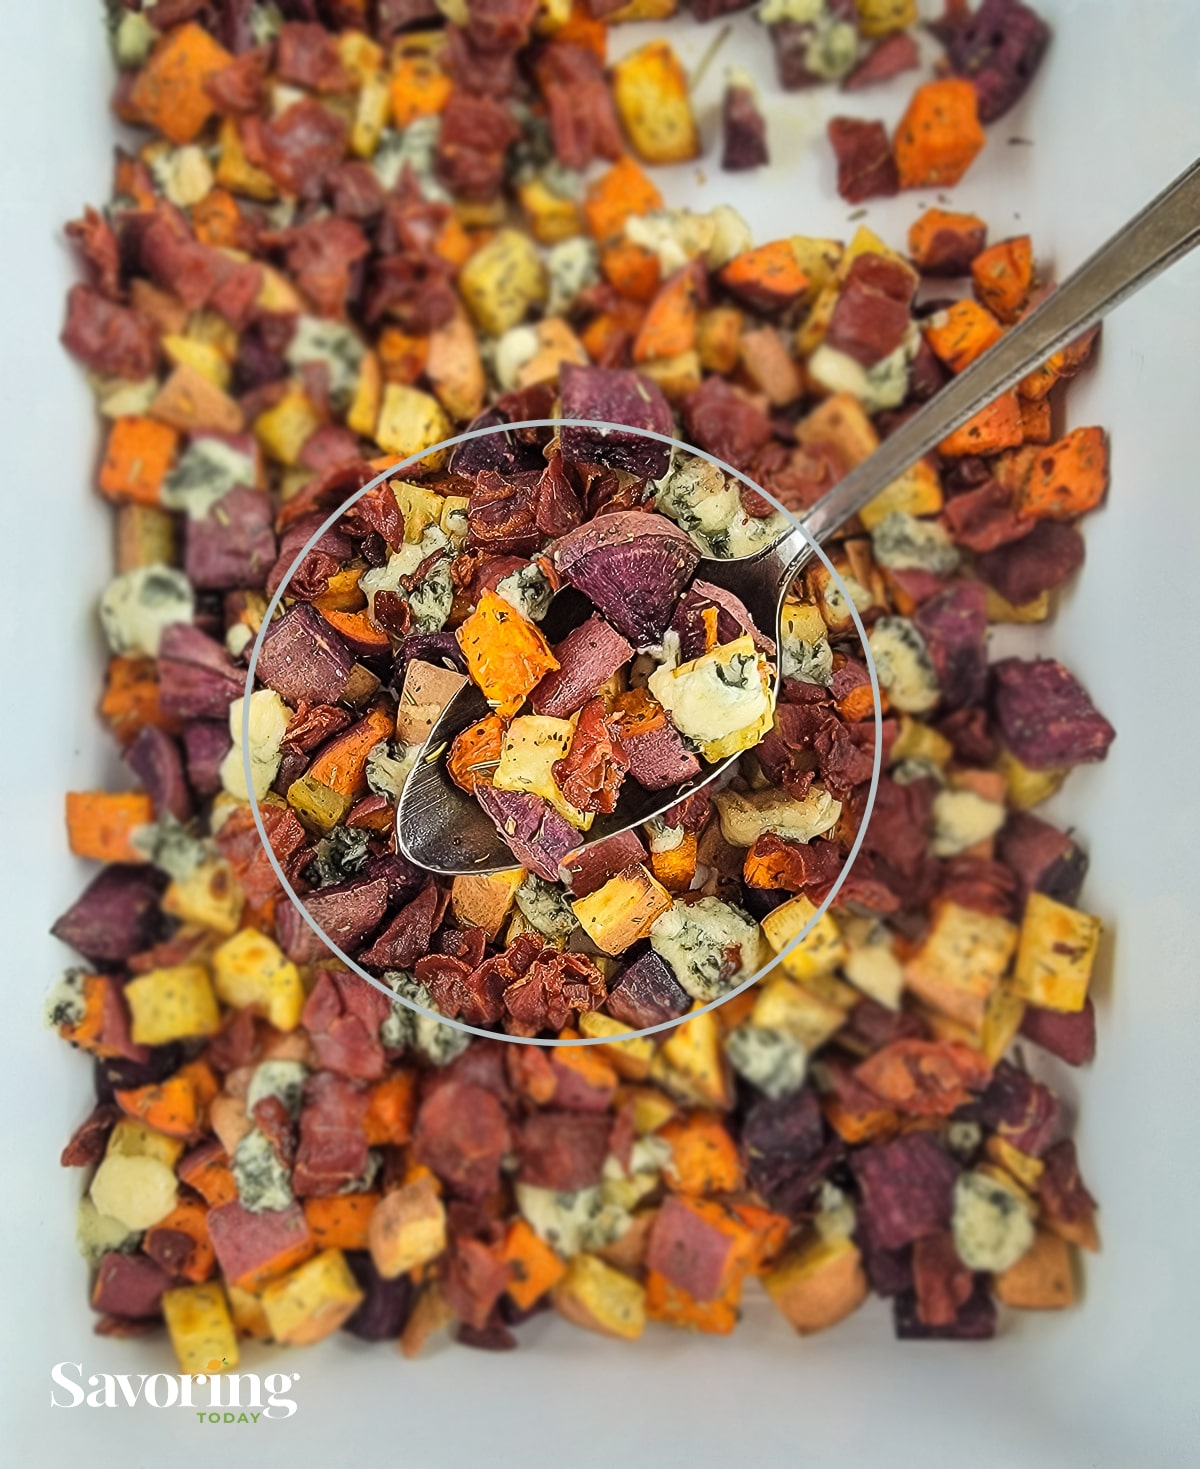 roast sweet potato dish with a circle highlight in the middle and background blurred